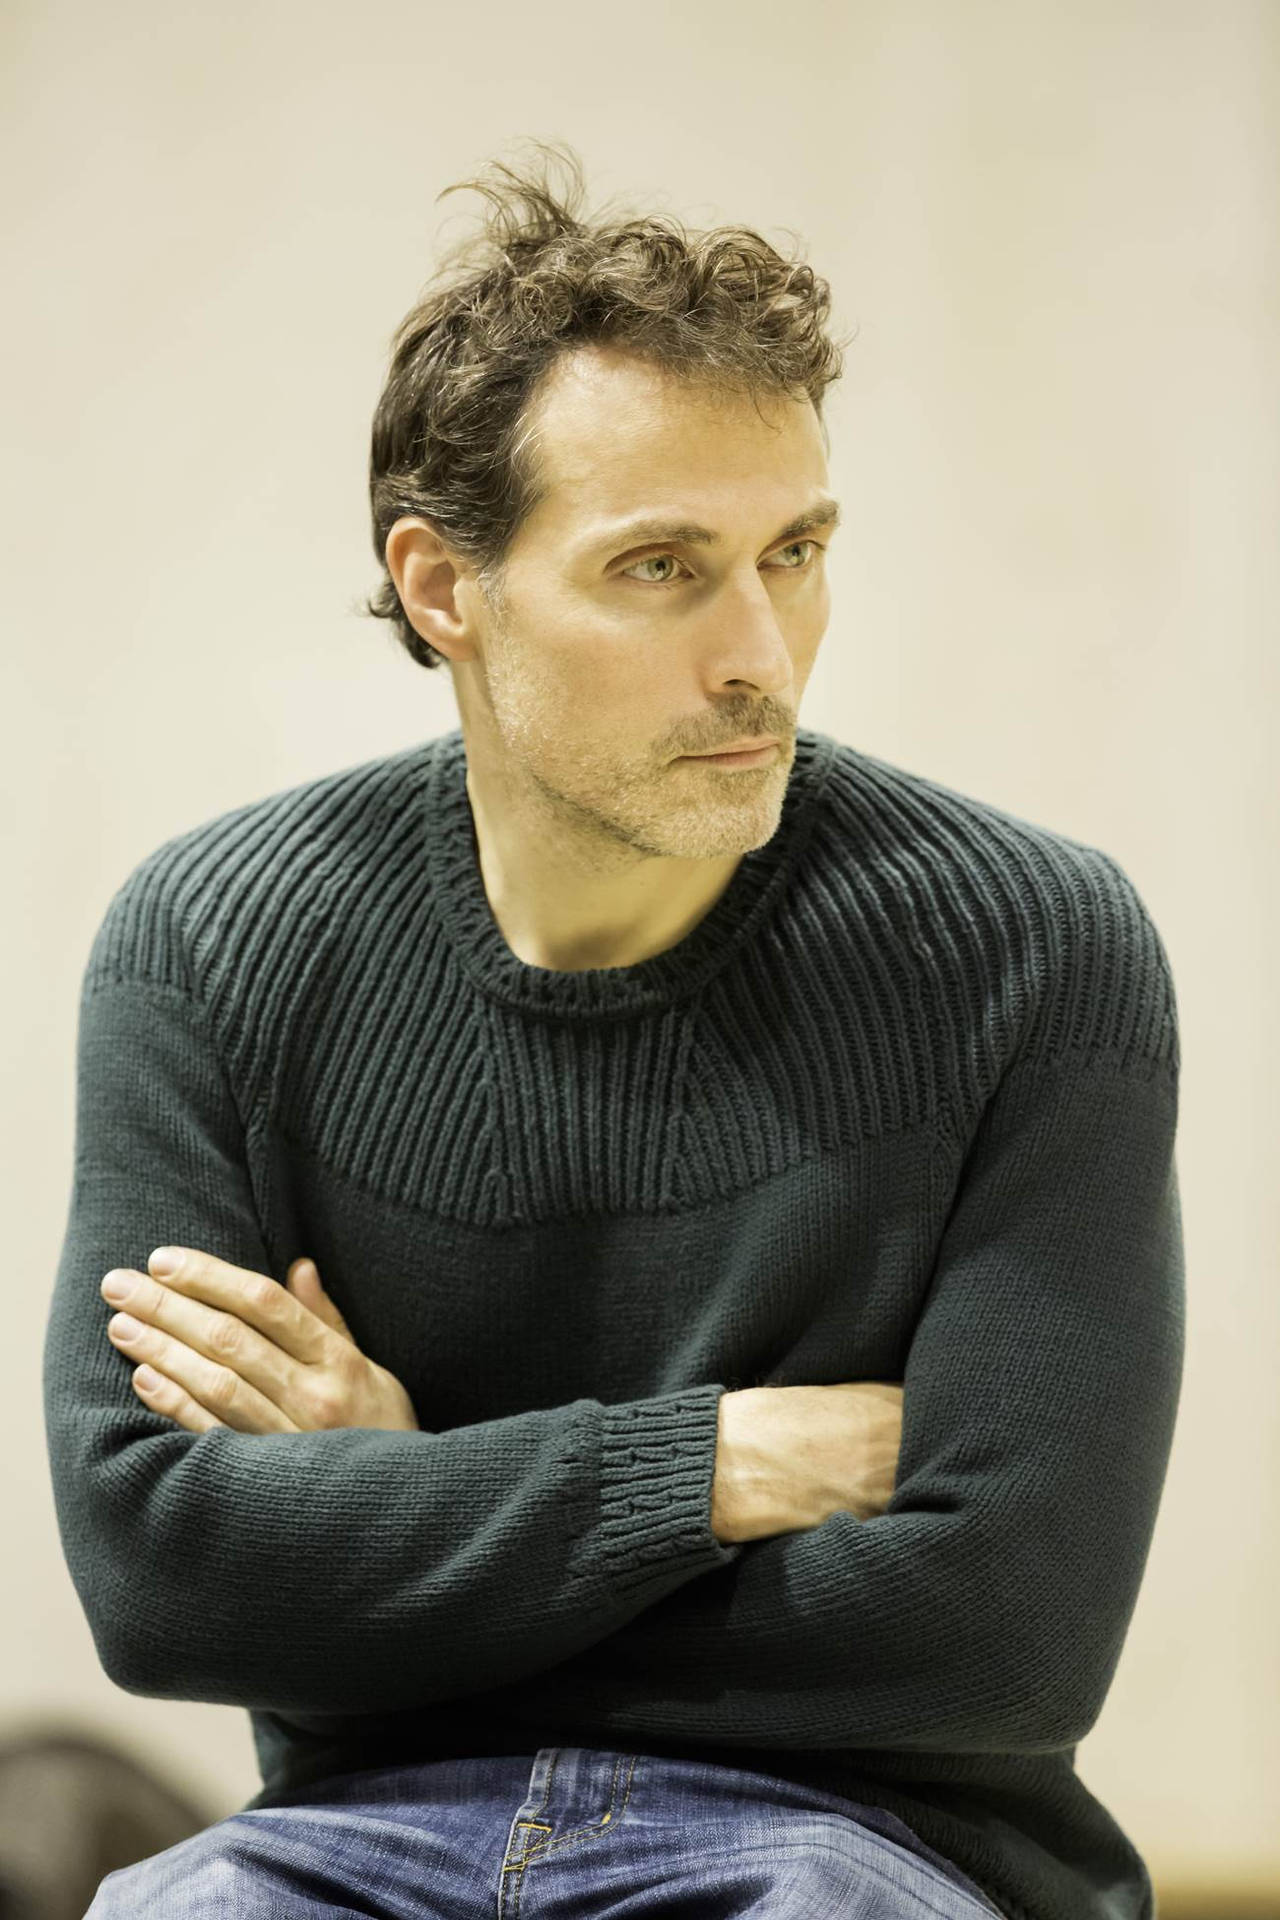 Rufus Sewell Posing with Crossed Arms in Black Sweater Wallpaper